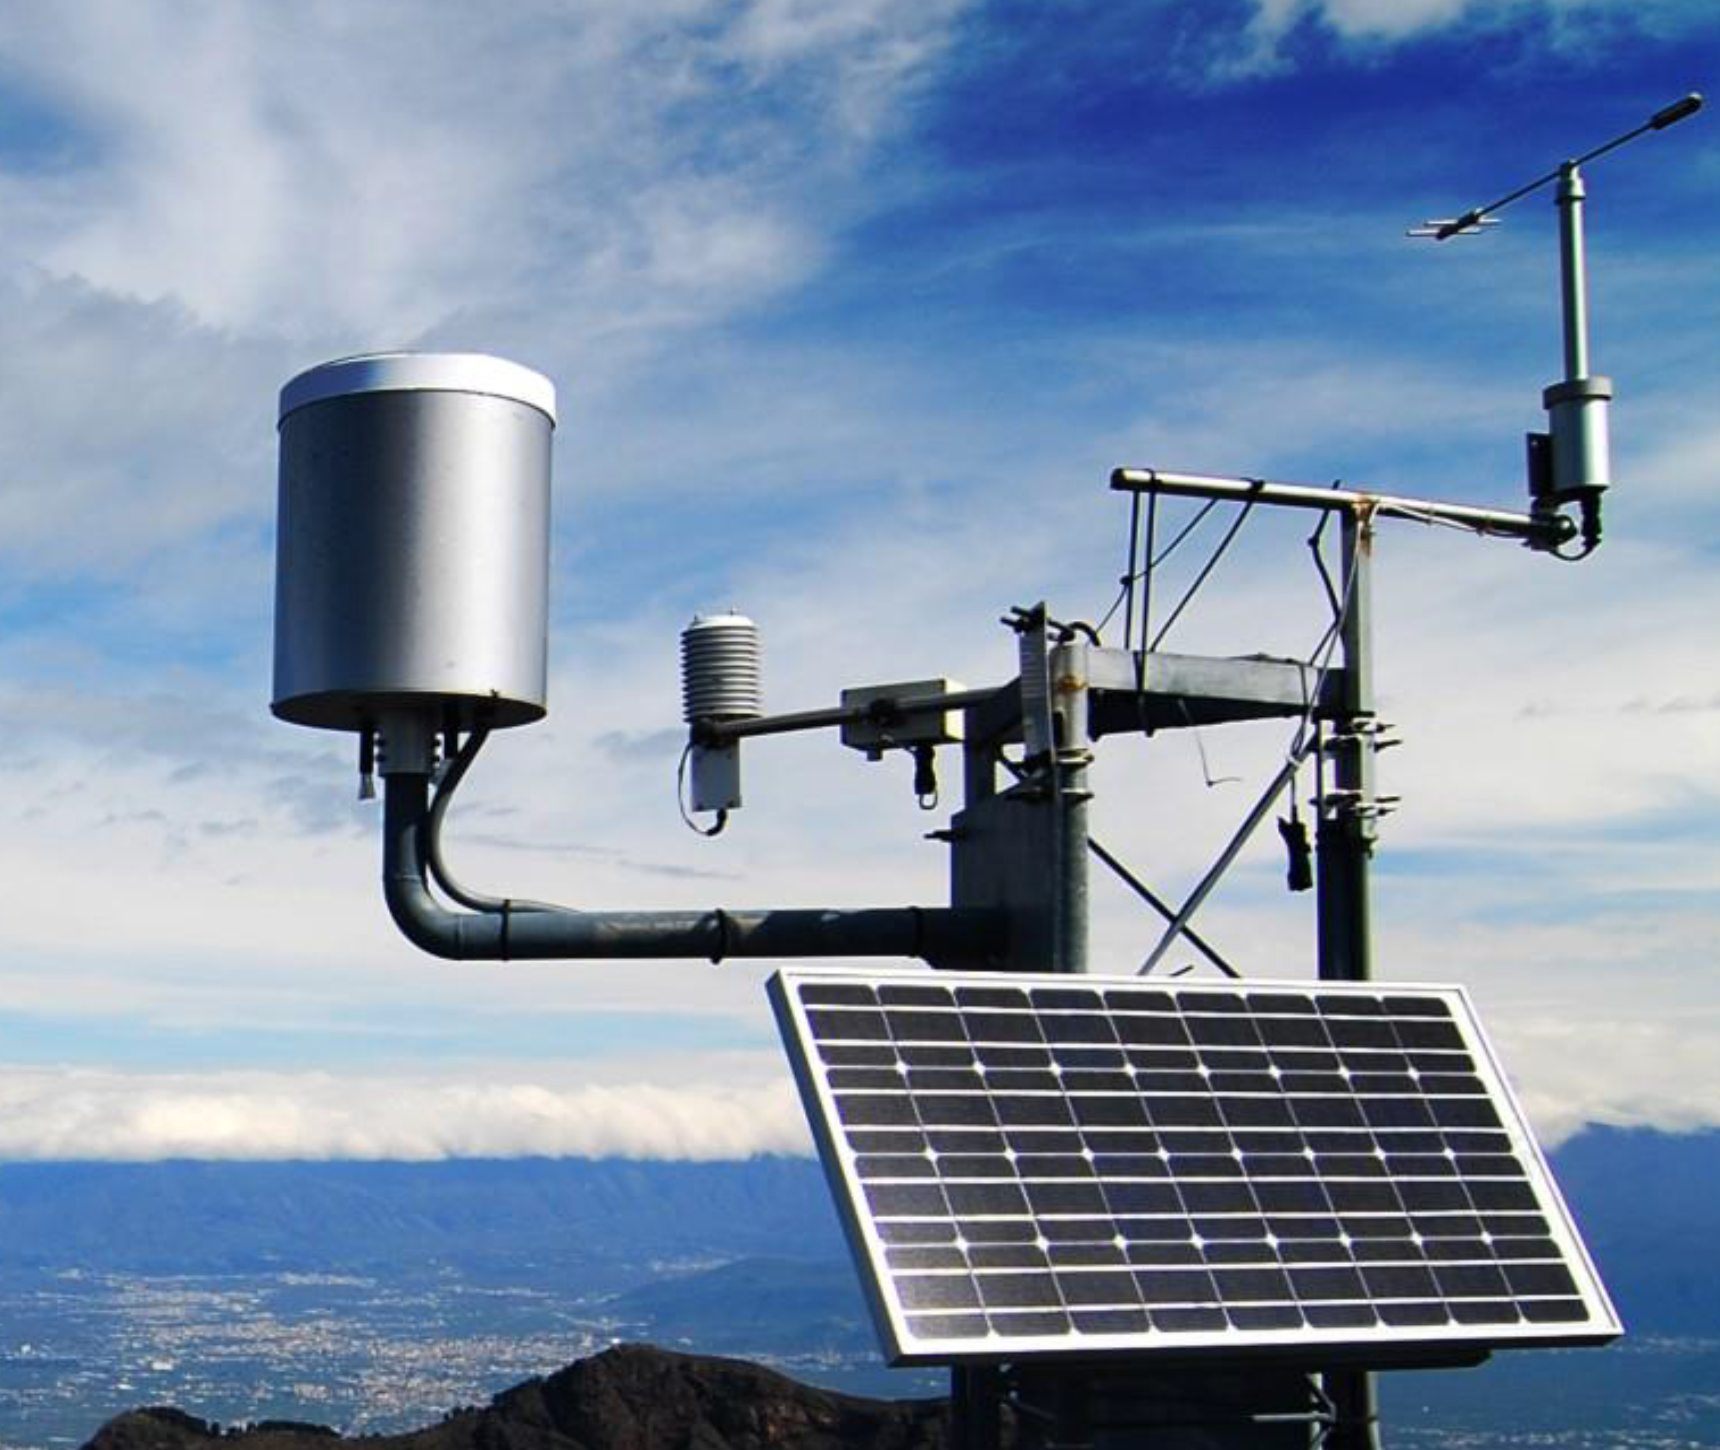 Automatic weather station. Credit: UNCC:eLearn